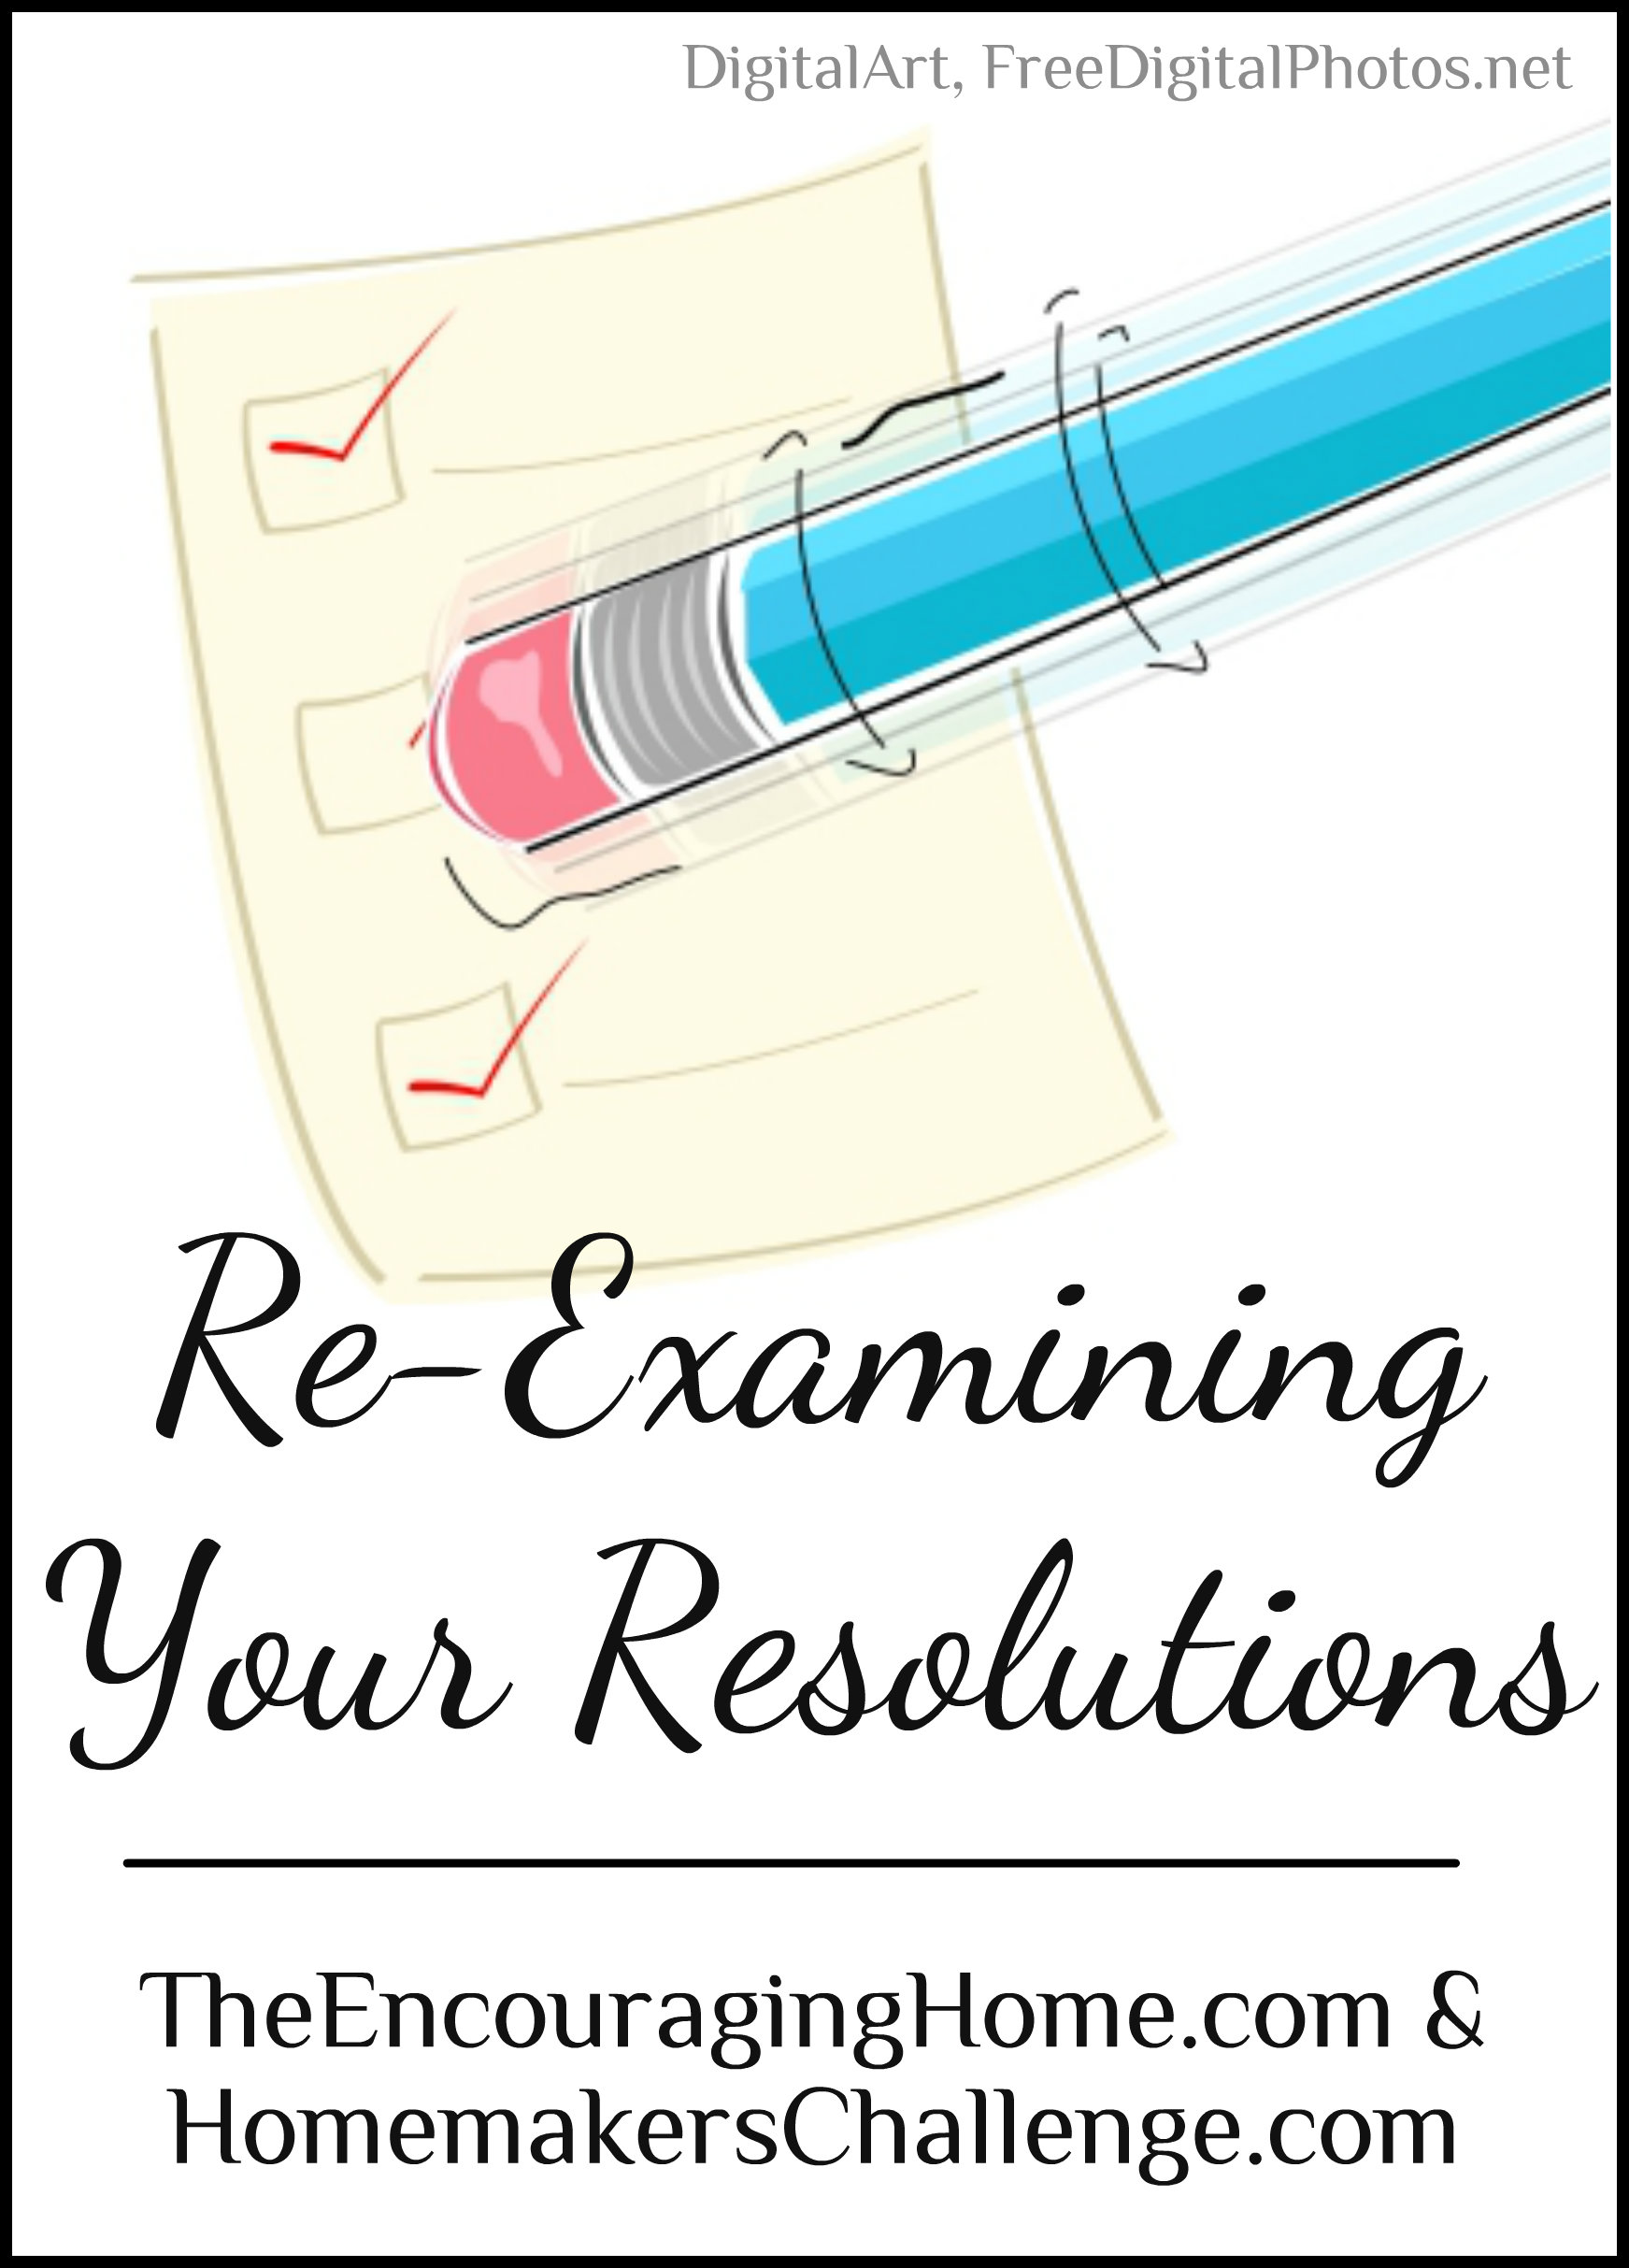 Re-Examining Your Resolutions